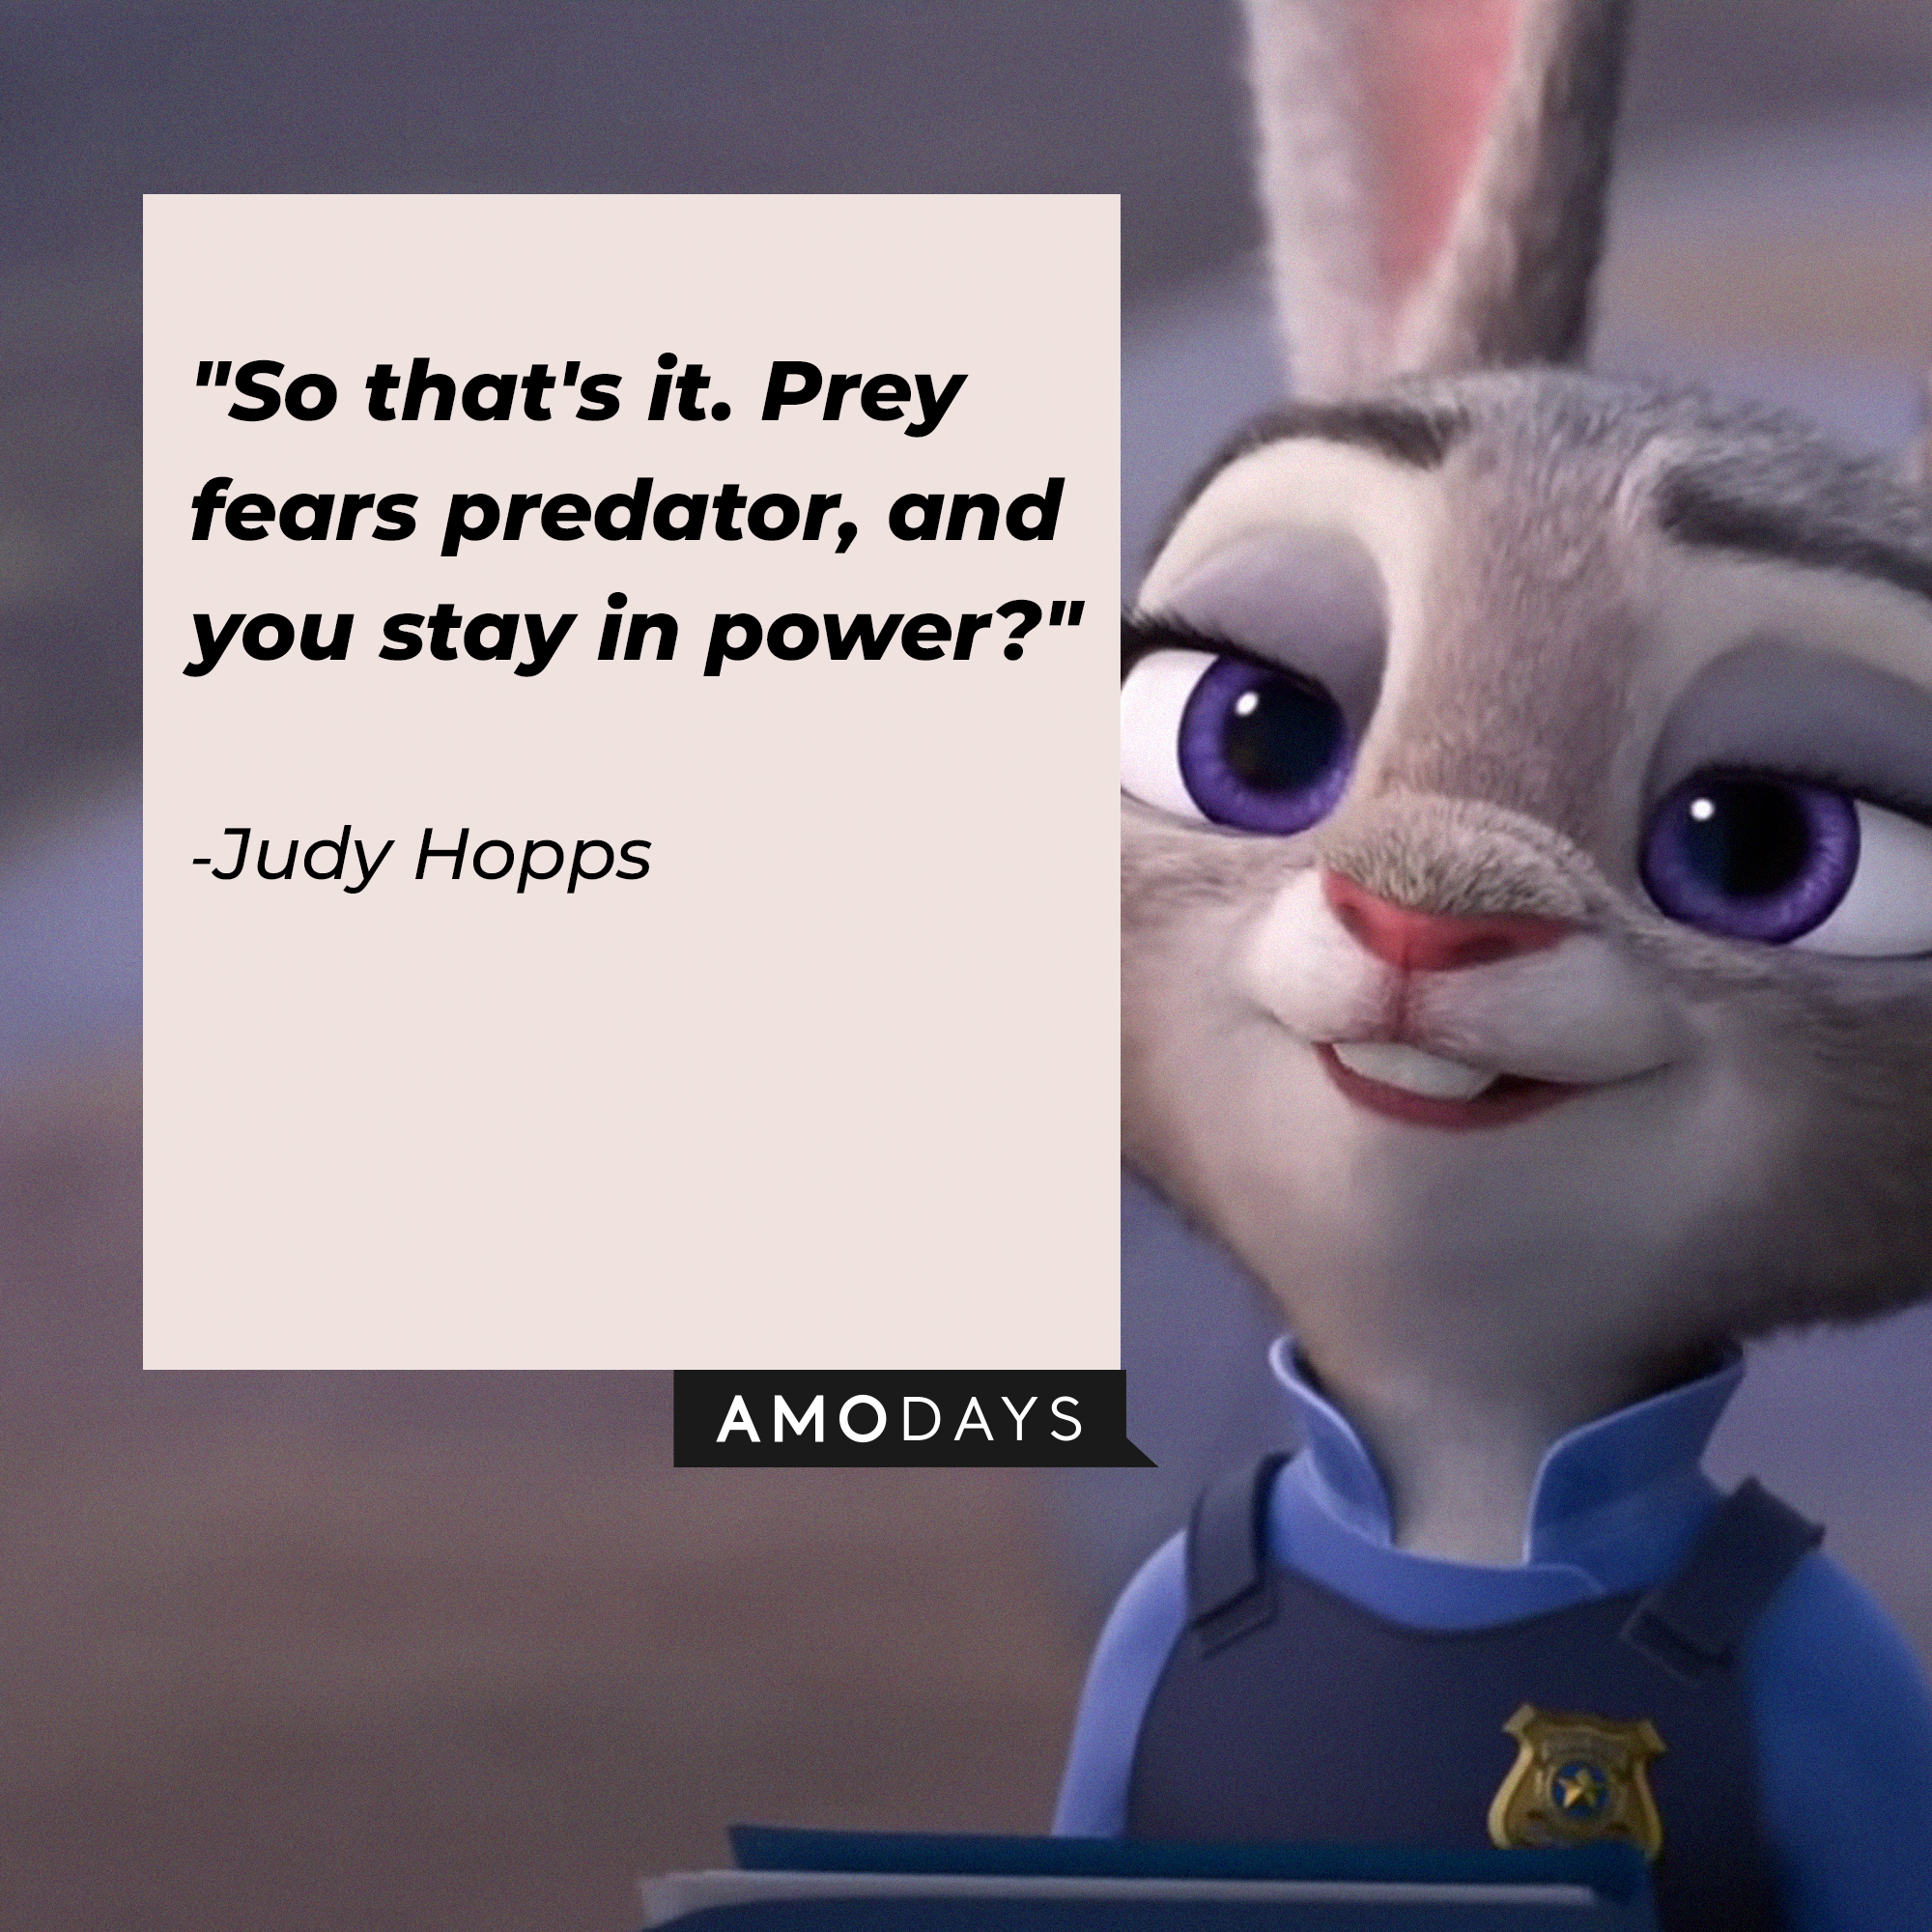 Jody Hopps' quote: “So that's it. Prey fears predator, and you stay in power?” | Source: facebook.com/DisneyZootopia